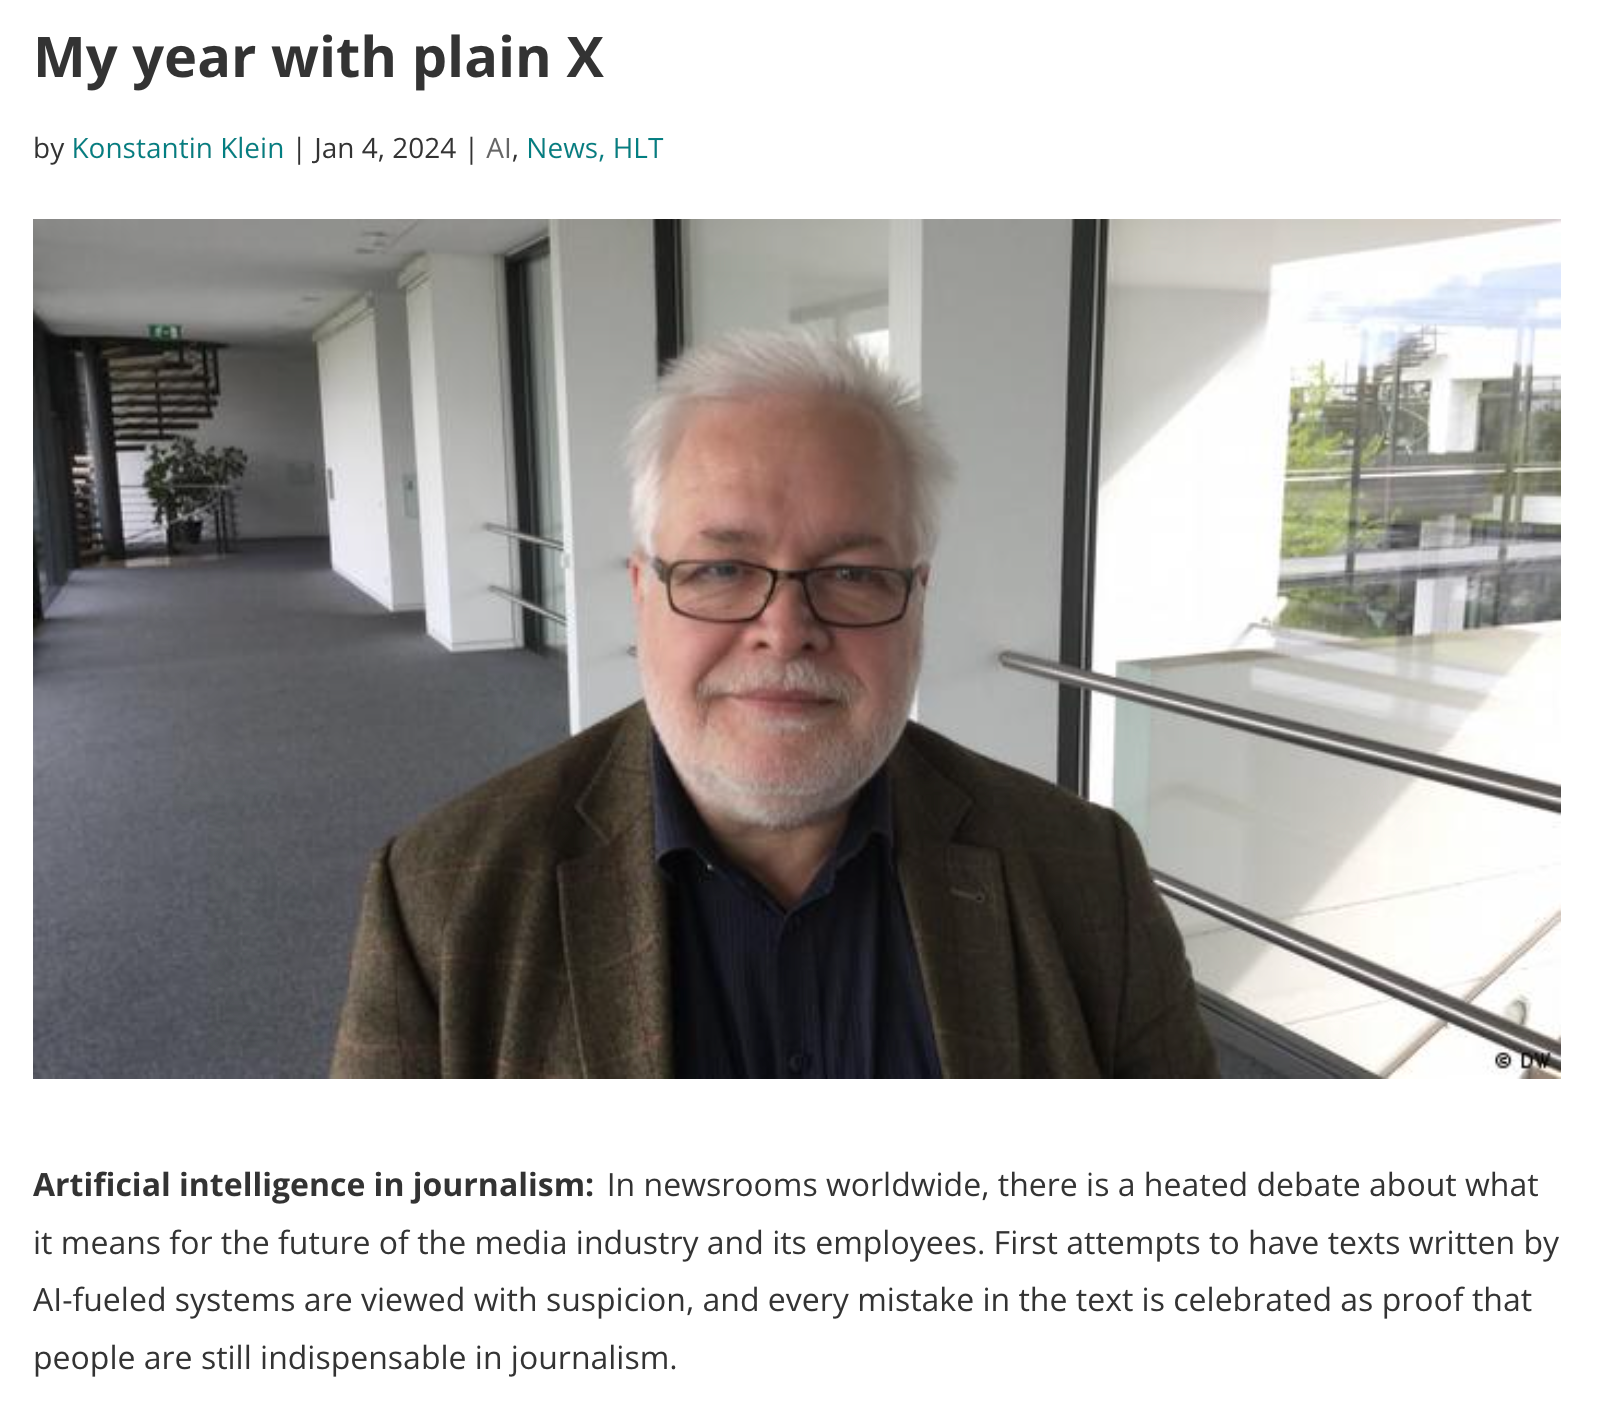 Screenshot of a blogpost called "My year with plain X" showing a photo from a man in a building looking into the camera.